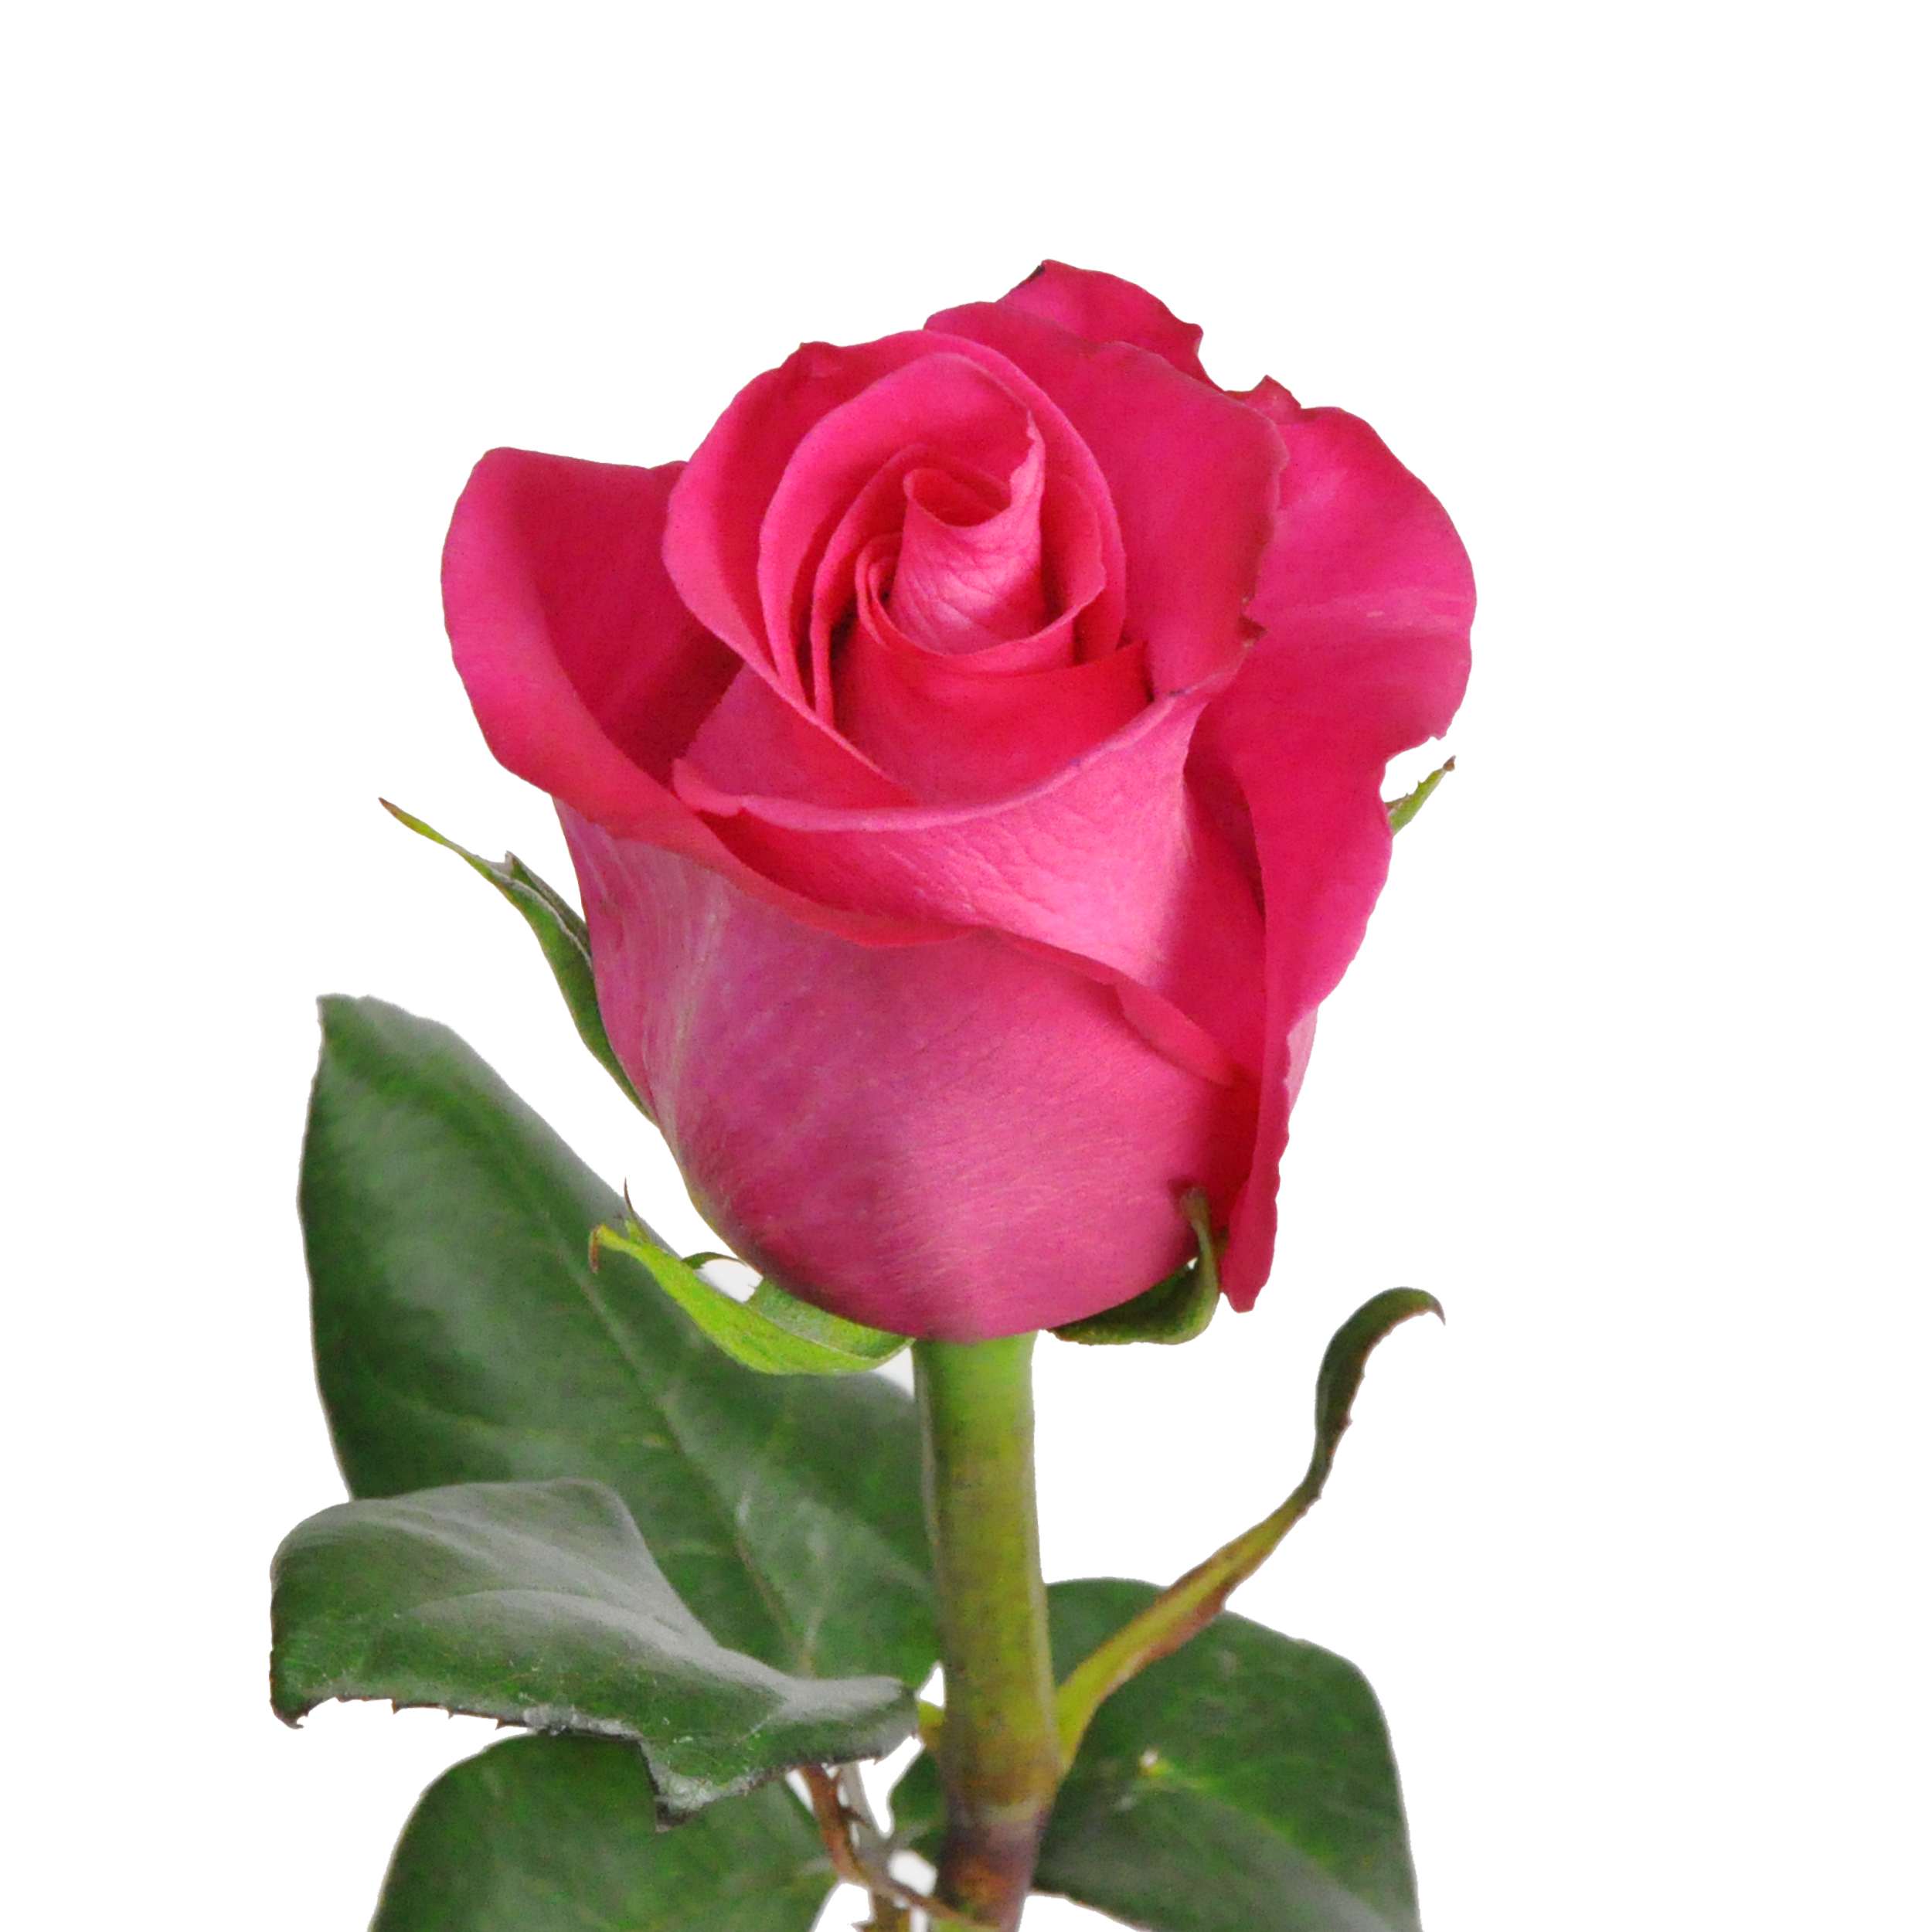 Hot Pink Roses - Farm Direct Fresh Cut Flowers - 50 Stems - Roses -by Bloomingmore - image 1 of 7